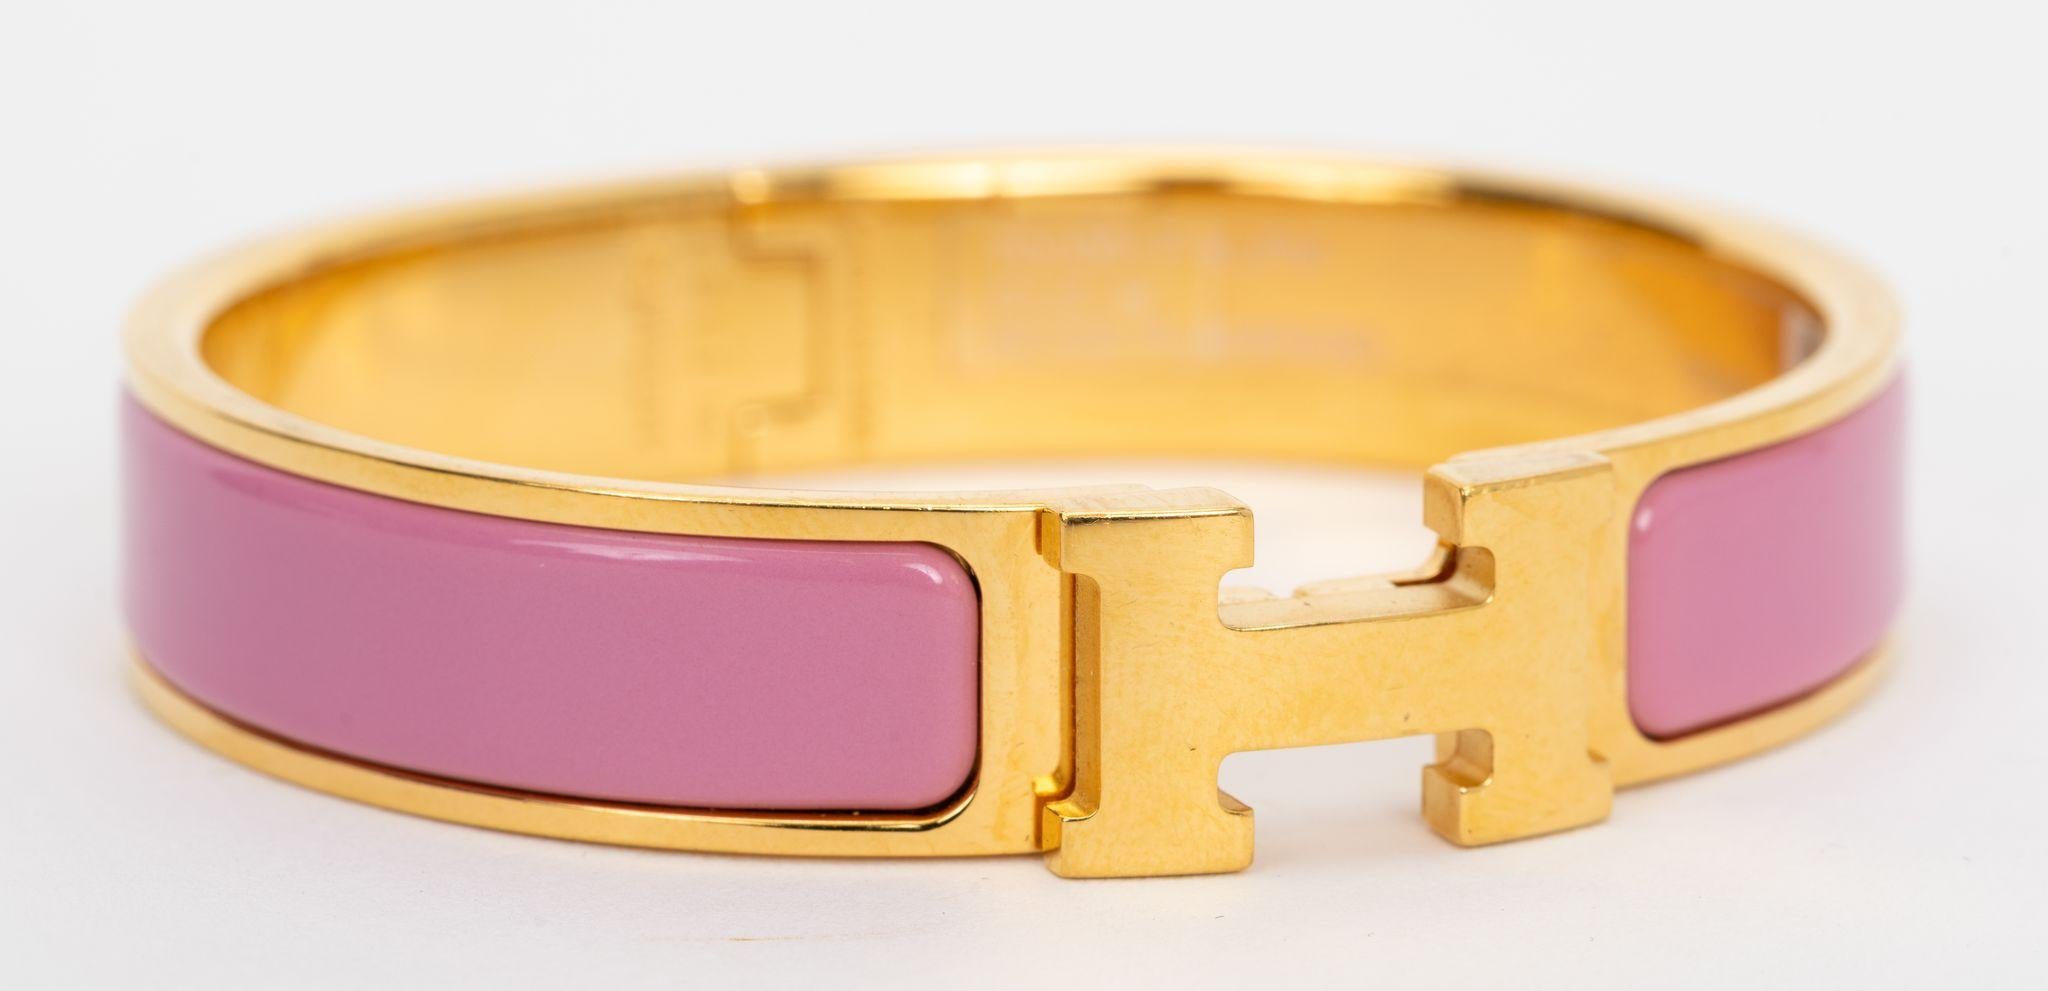 The Hermes Clic Clac H, narrow bracelet, in rose flamingo enamel with gold-plated hardware.
Size PM, new in unworn condition, comes with velvet pouch.